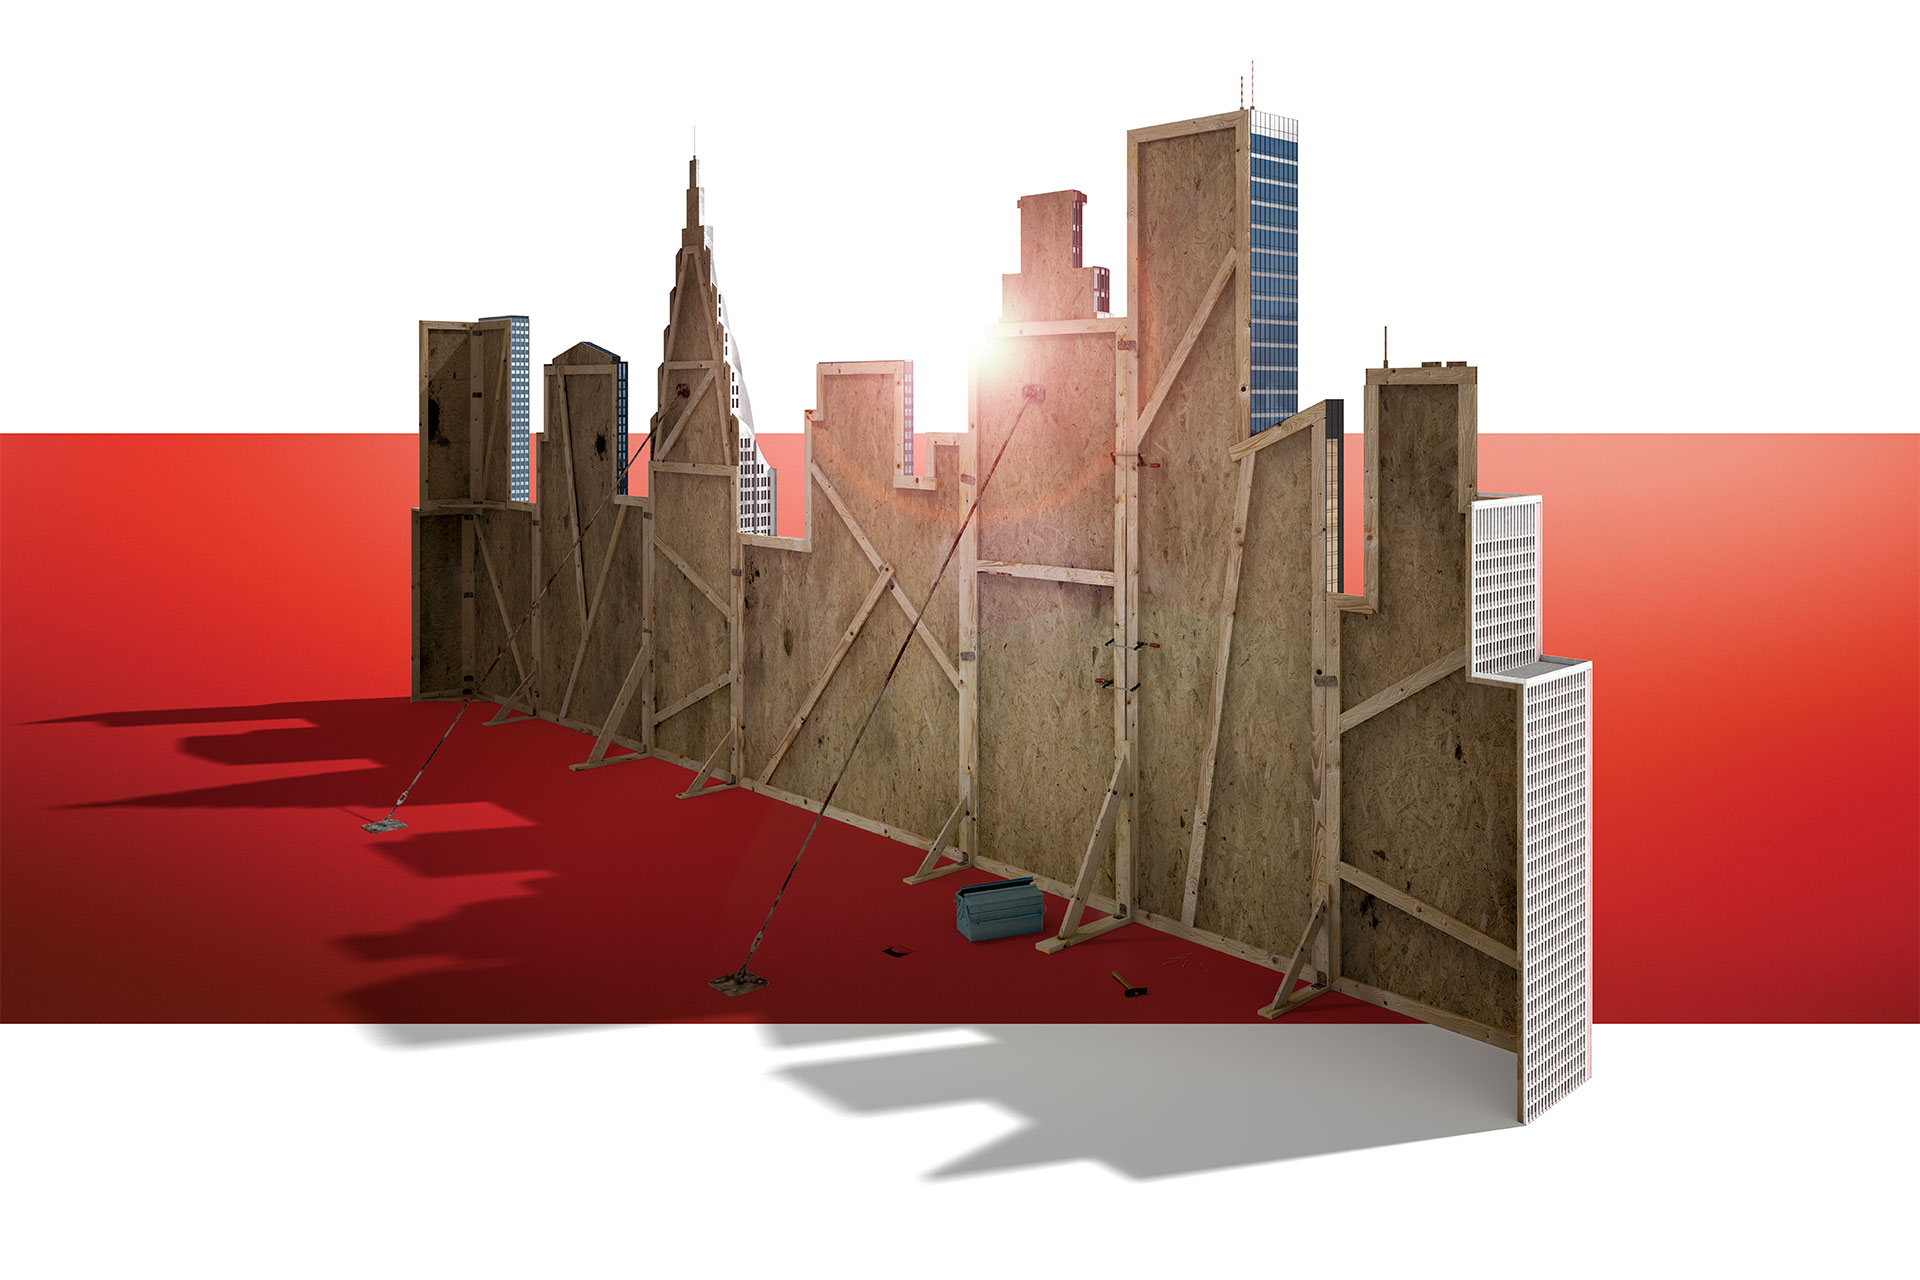 Shilouette of stage model depicting several skyscrapers seen from behind. The skyscrapers on their front side look like the real thing, while their backside reveal that they are a facade made out of plywood.